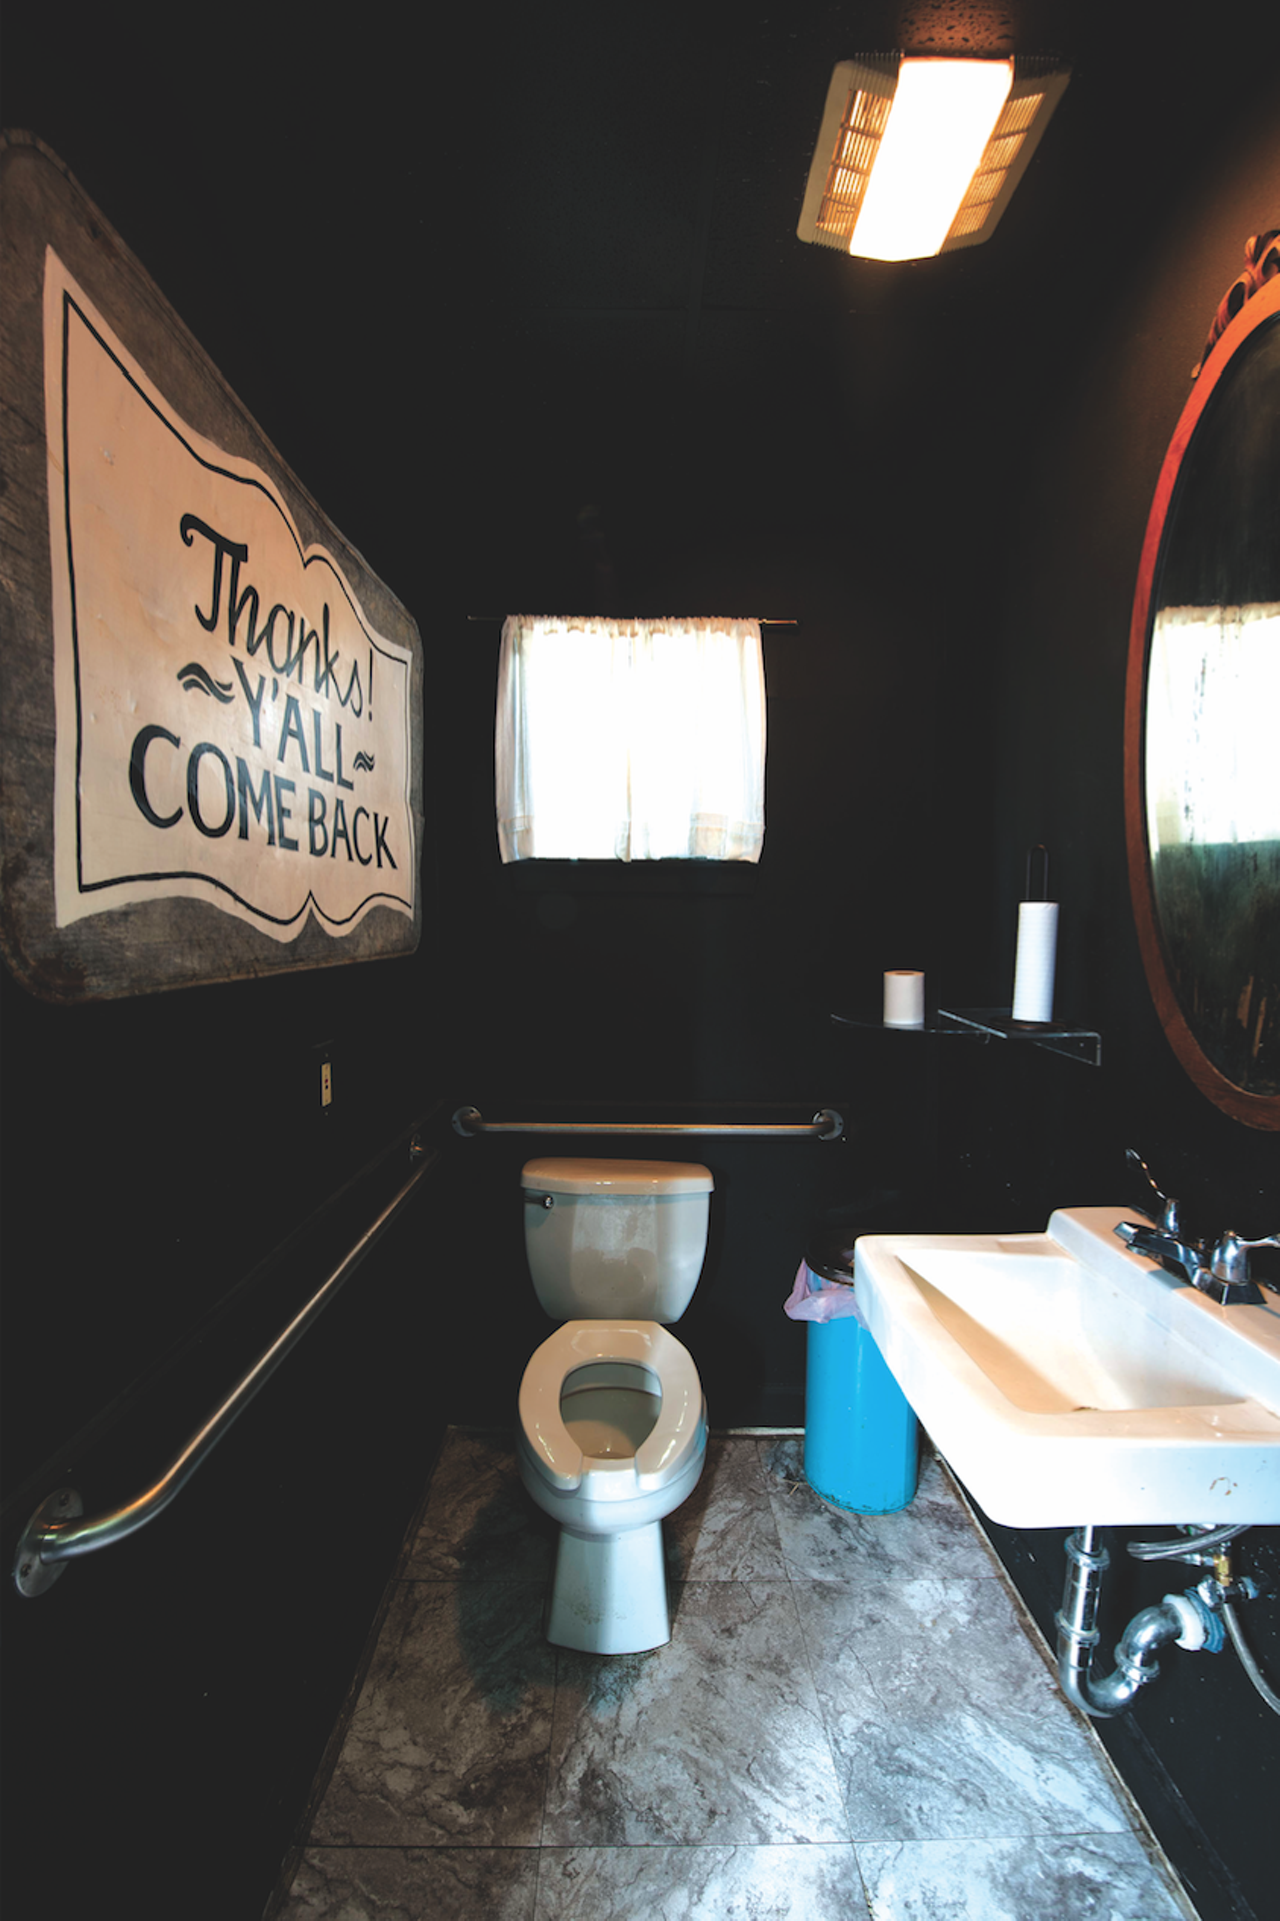 Lowcountry // Although compact, each restroom at Lowcountry is clean and private enough from the on-goings that often include live music by local country artists. The women’s restroom, painted black like the rest of the interiors, features an antique mirror and delicate lighting, capped off with a large, hand-painted metal sign. “Thanks y’all, come back,” as painted by Lowcountry’s Drew Morros (she based it off a sign in the back of a Gracious Goodness cookbook) nails this bar’s Southern charm. 318 Martinez St., (210) 560-2224, lowcountrysa.com.